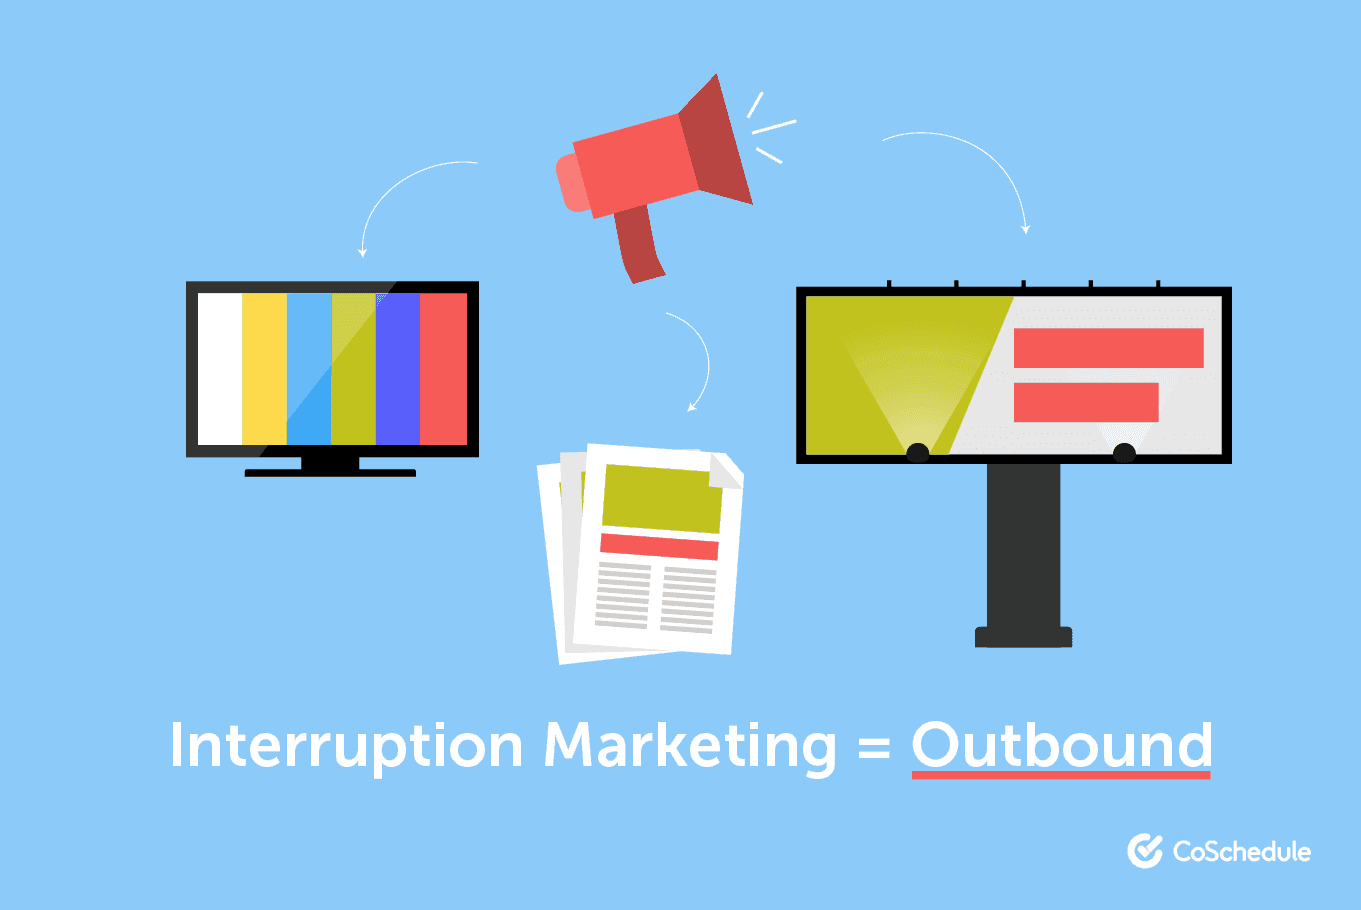 Interruption marketing is the same as outbound marketing